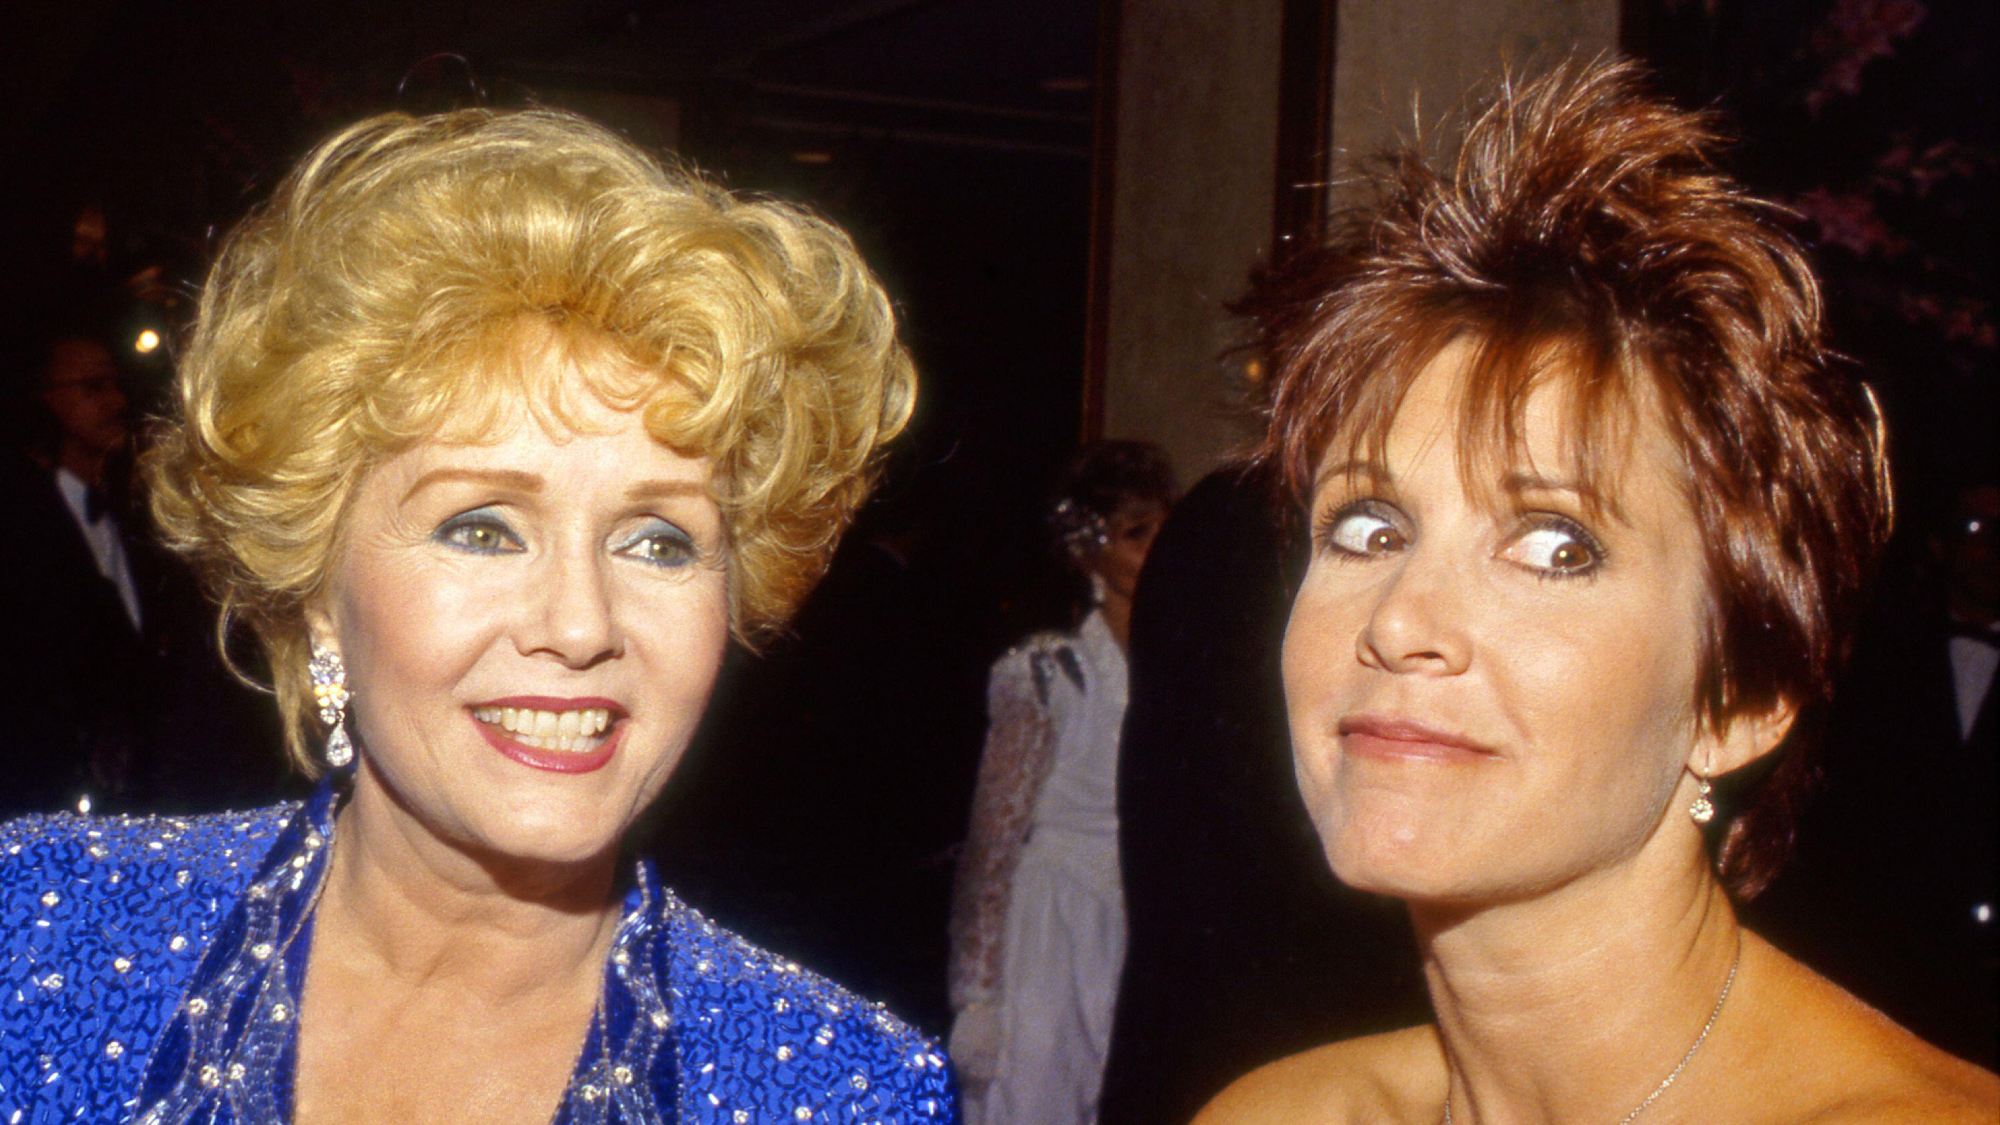 Debbie Reynolds and Carrie Fisher mug for the cameras at a gala in Beverly HIlls, CA